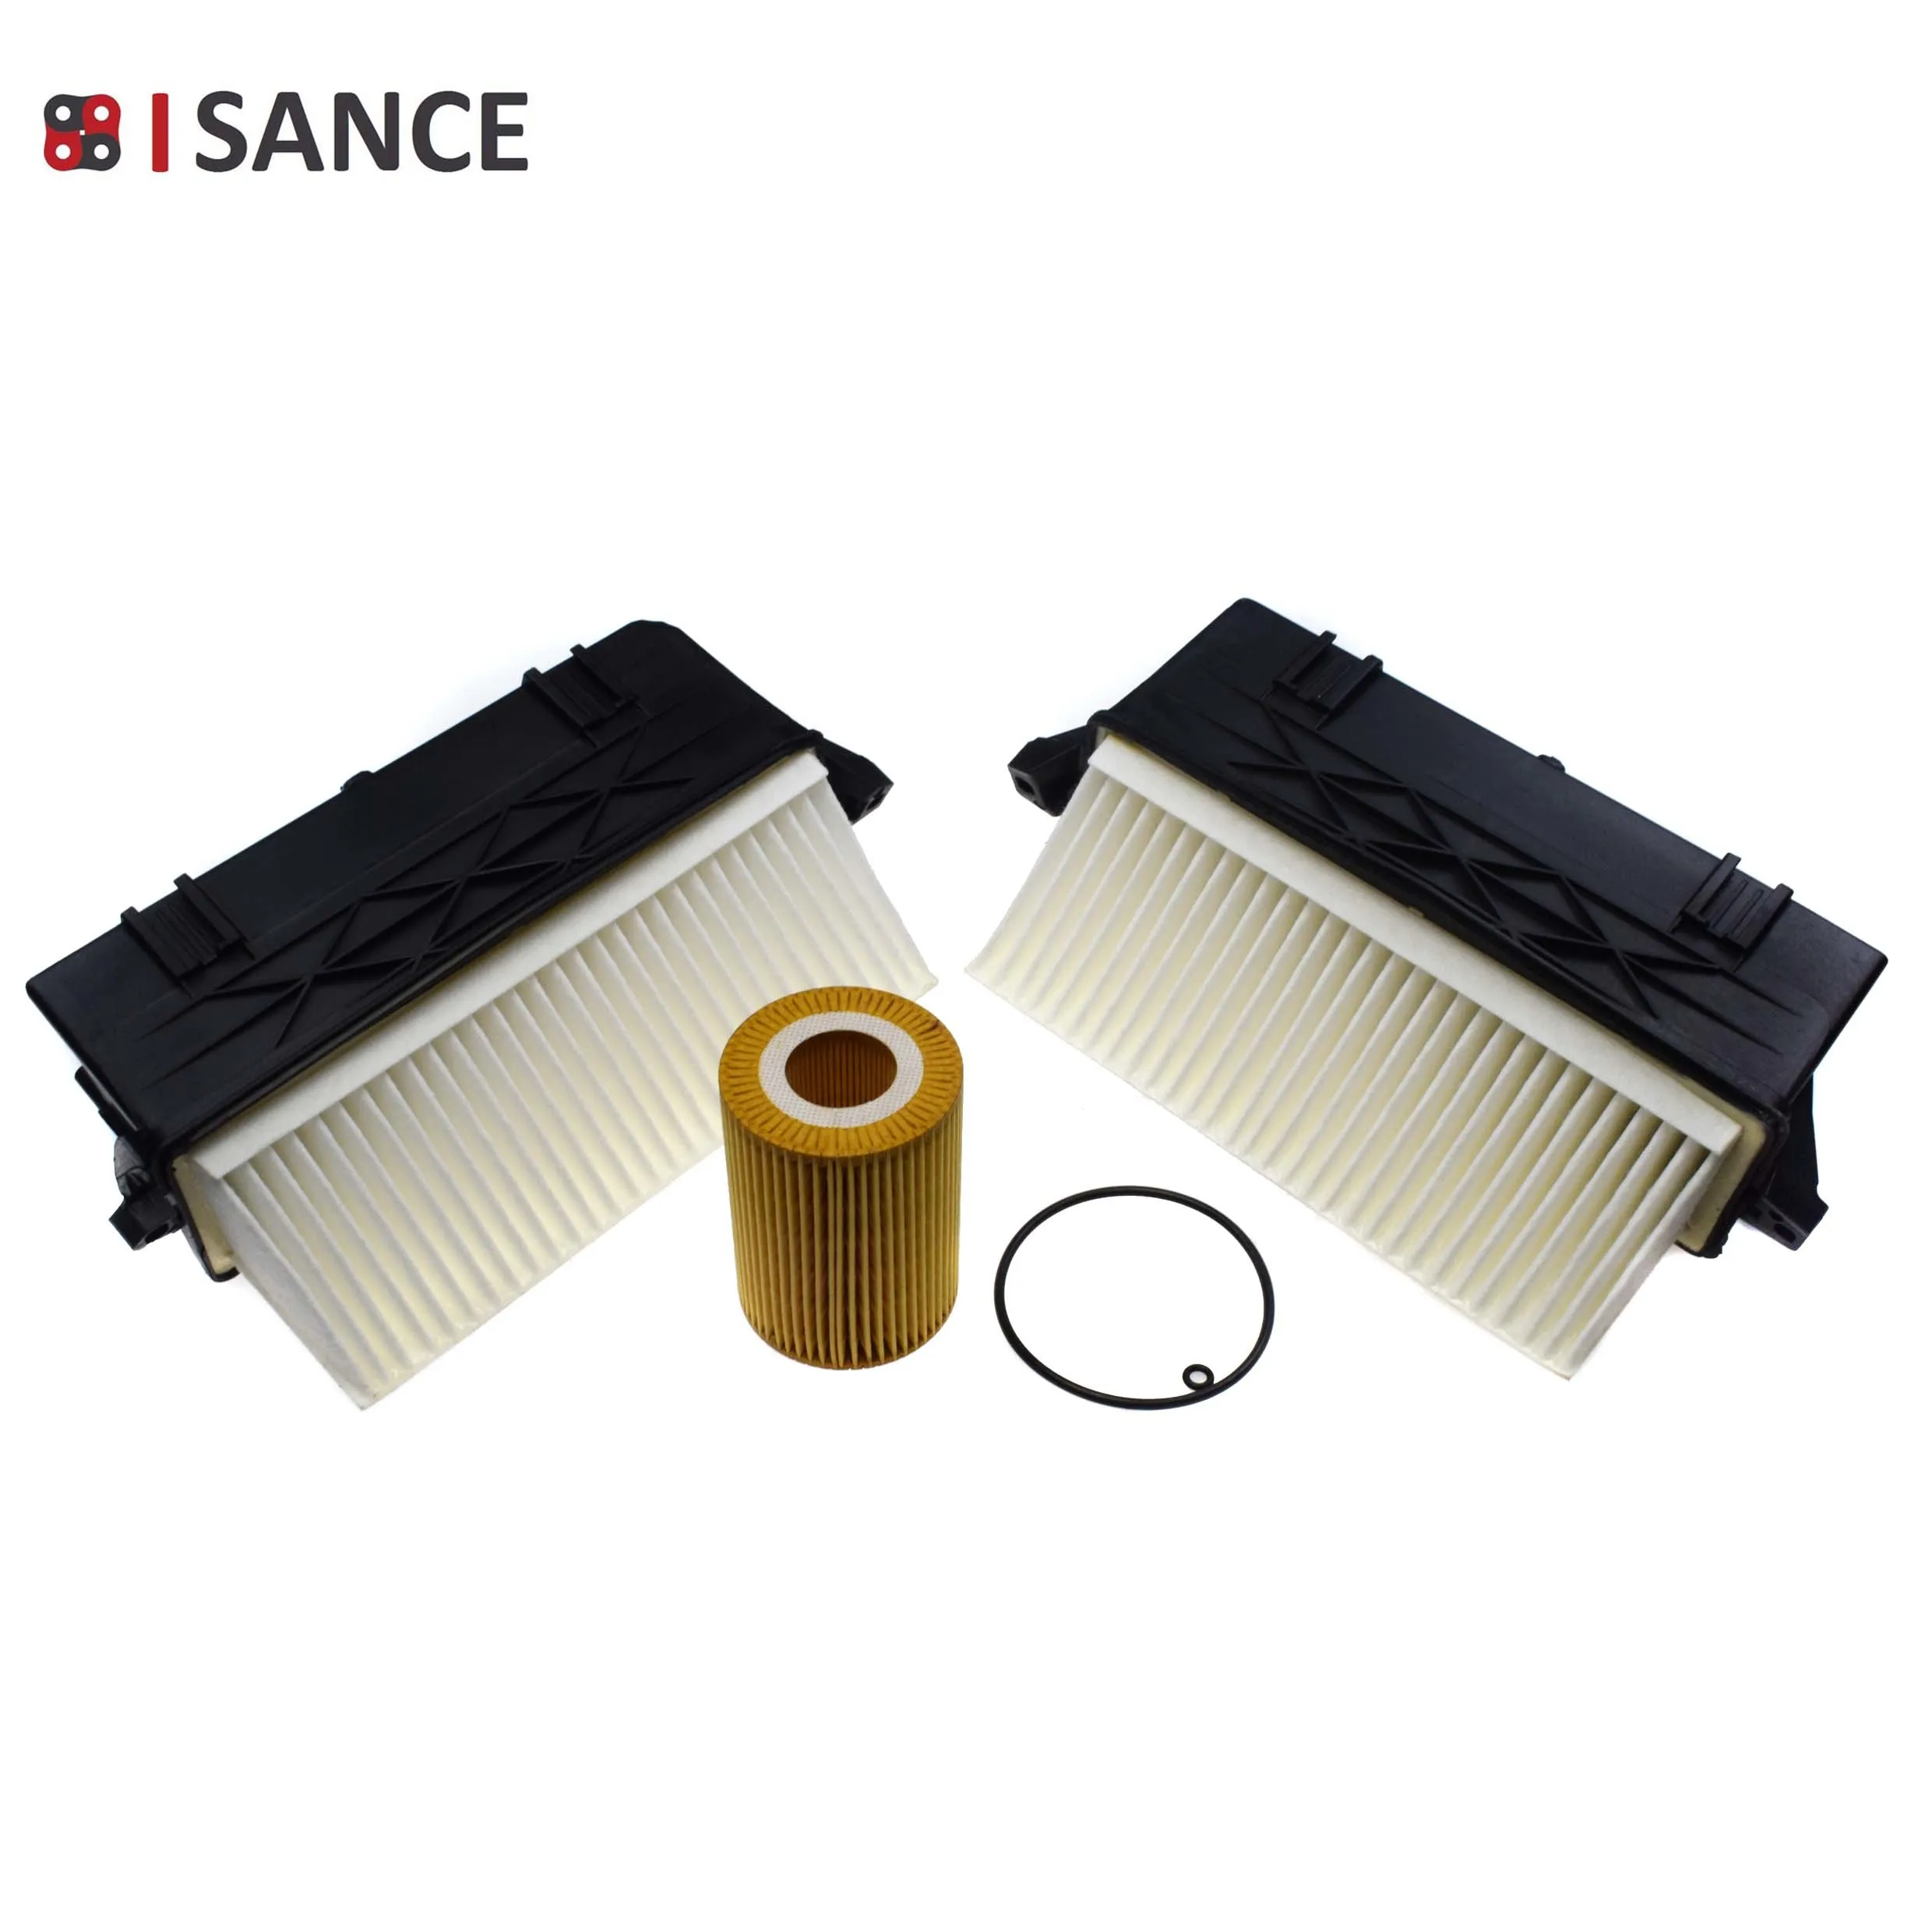 2pcs Right Left Bench Air Filter for W204 S204 C218 X218 W212 W166 W221/222 300/350 CDI A207 C207 S212 X164 X204 